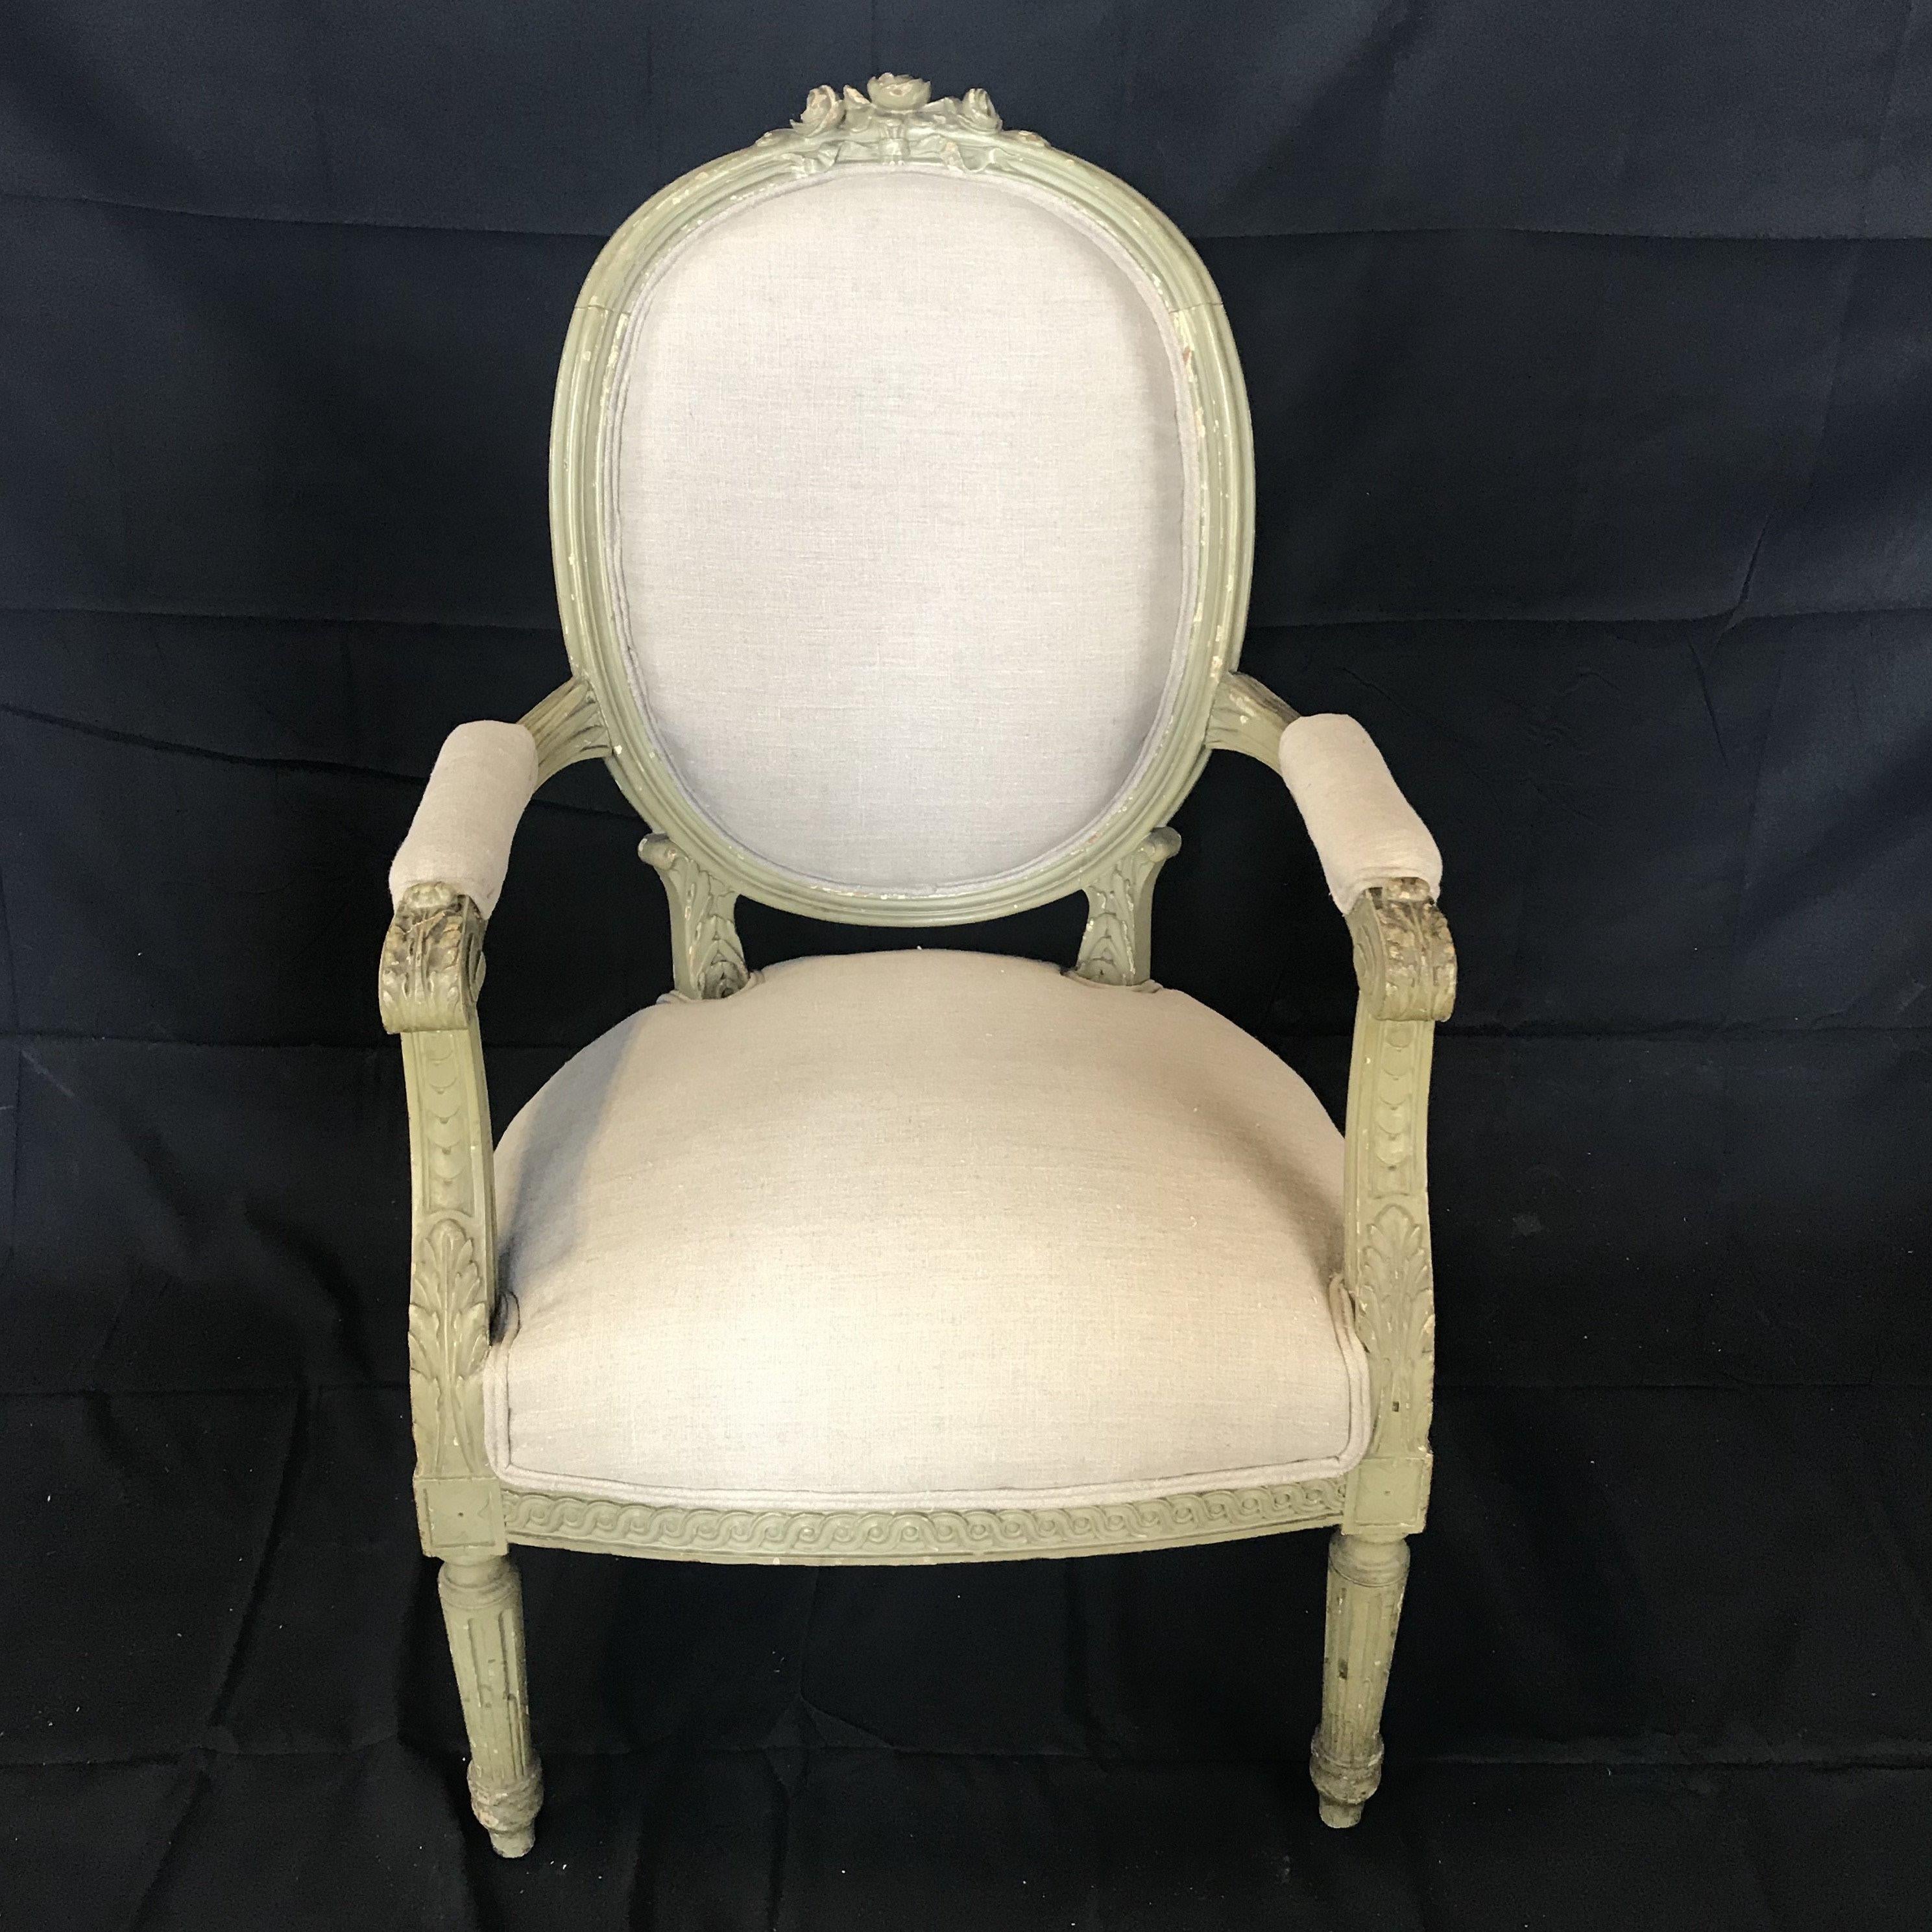 A very pretty late 19th century three piece Louis XVI style parlor set consisting of a settee and a pair of arm chairs having beautiful carved designs on the painted arms and legs and Classic oval backs. Newly reupholstered in a French linen cotton